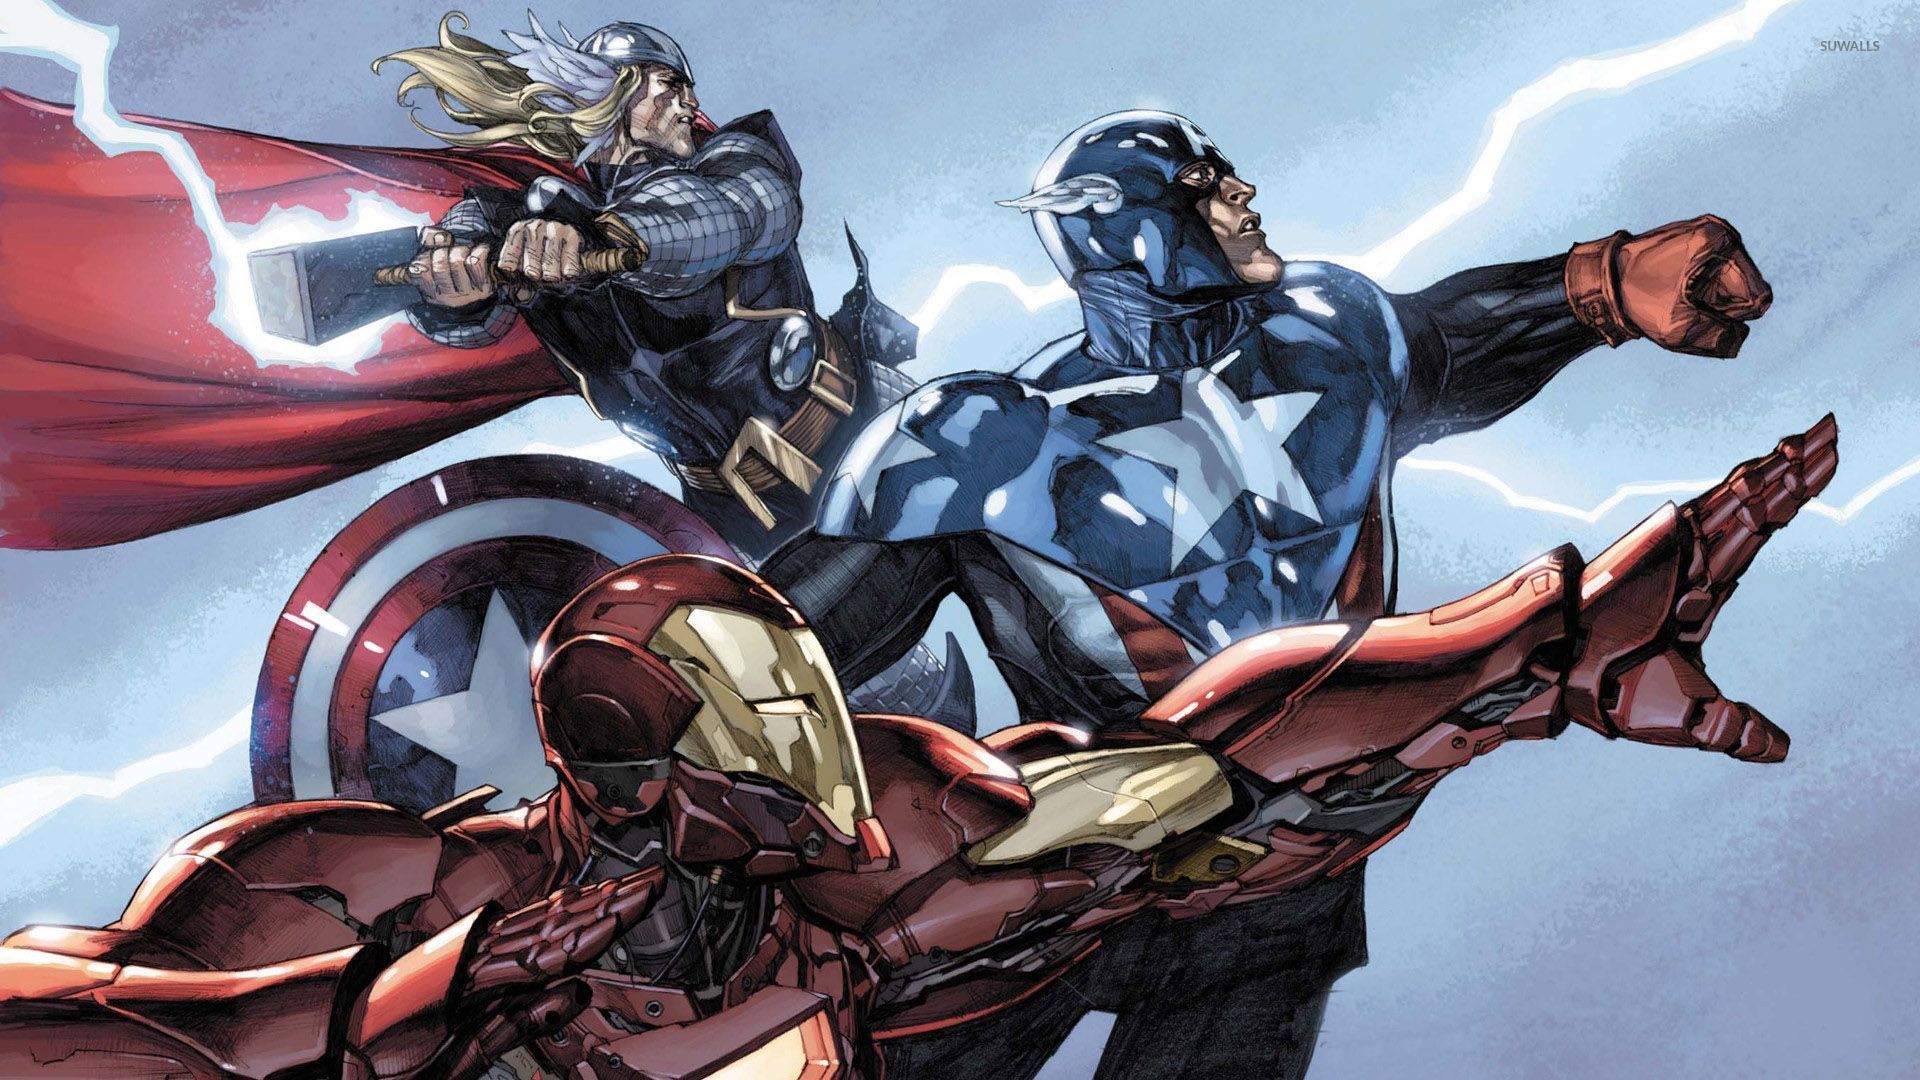 Thor, Captain America and Iron Man wallpaper - Comic wallpapers - #29376